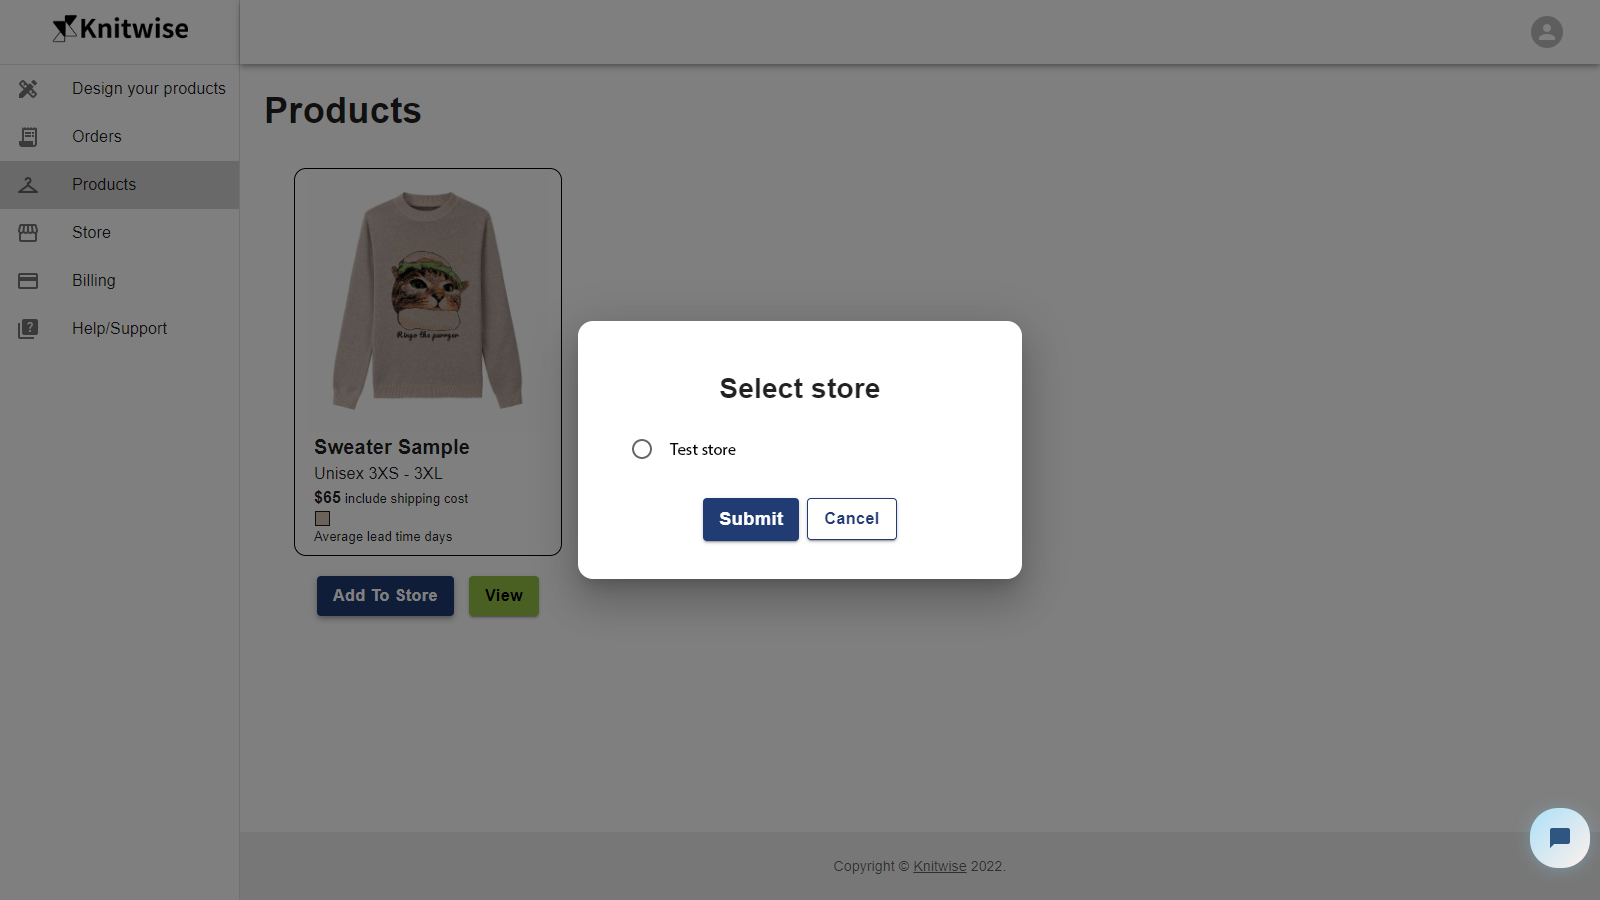 Product section- add approved knitwear product to your store